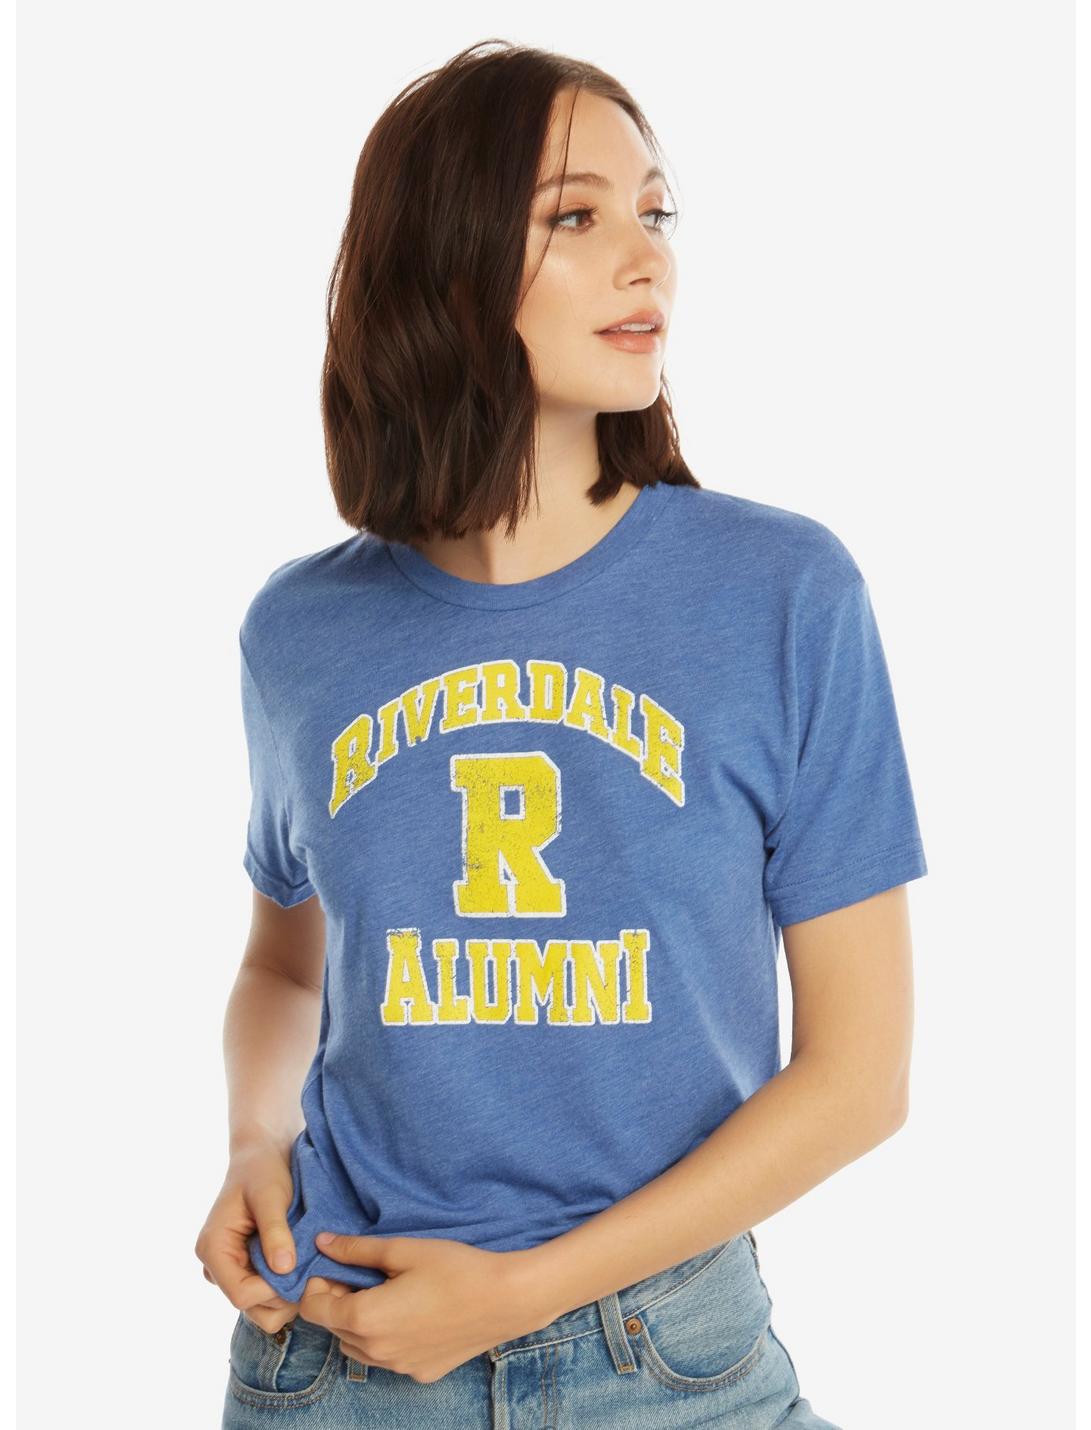 Riverdale Alumni Womens Tee - BoxLunch Exclusive, BLUE, hi-res